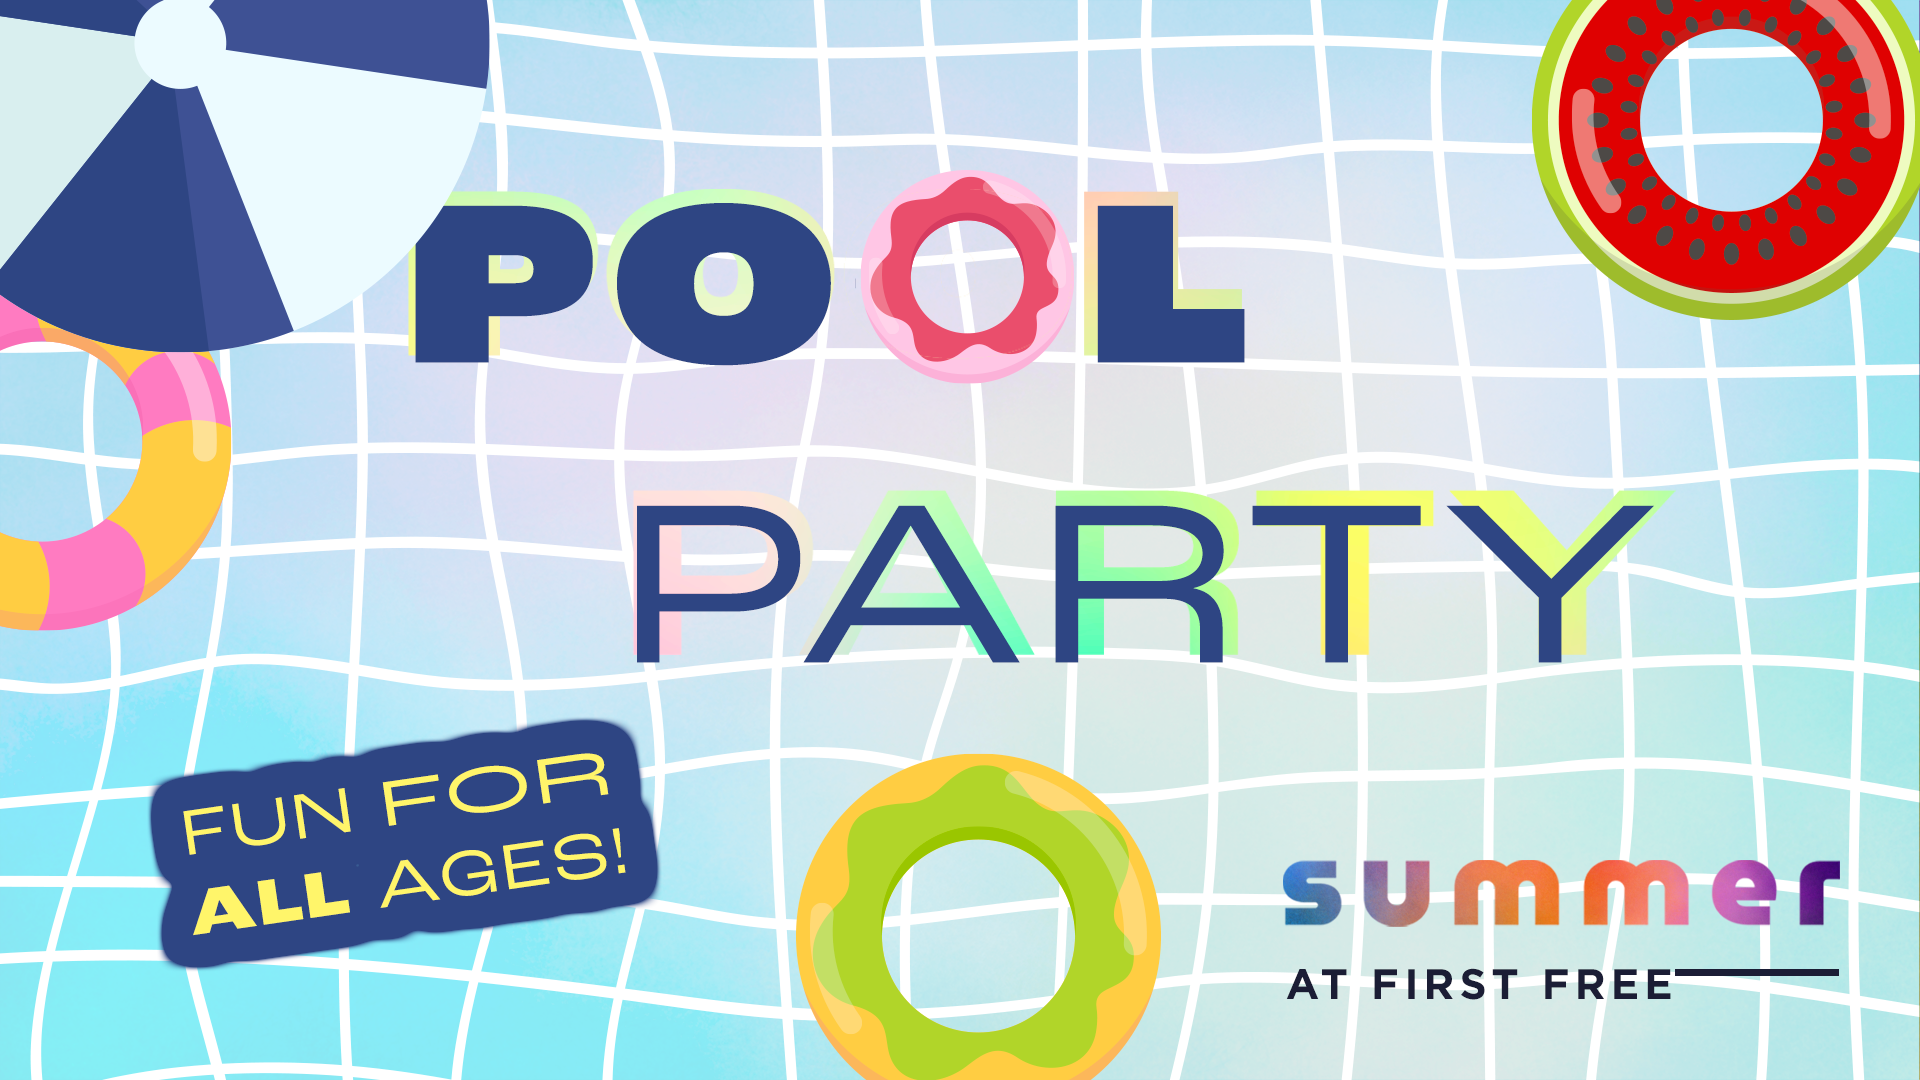 Pool Party: Fun for all ages!